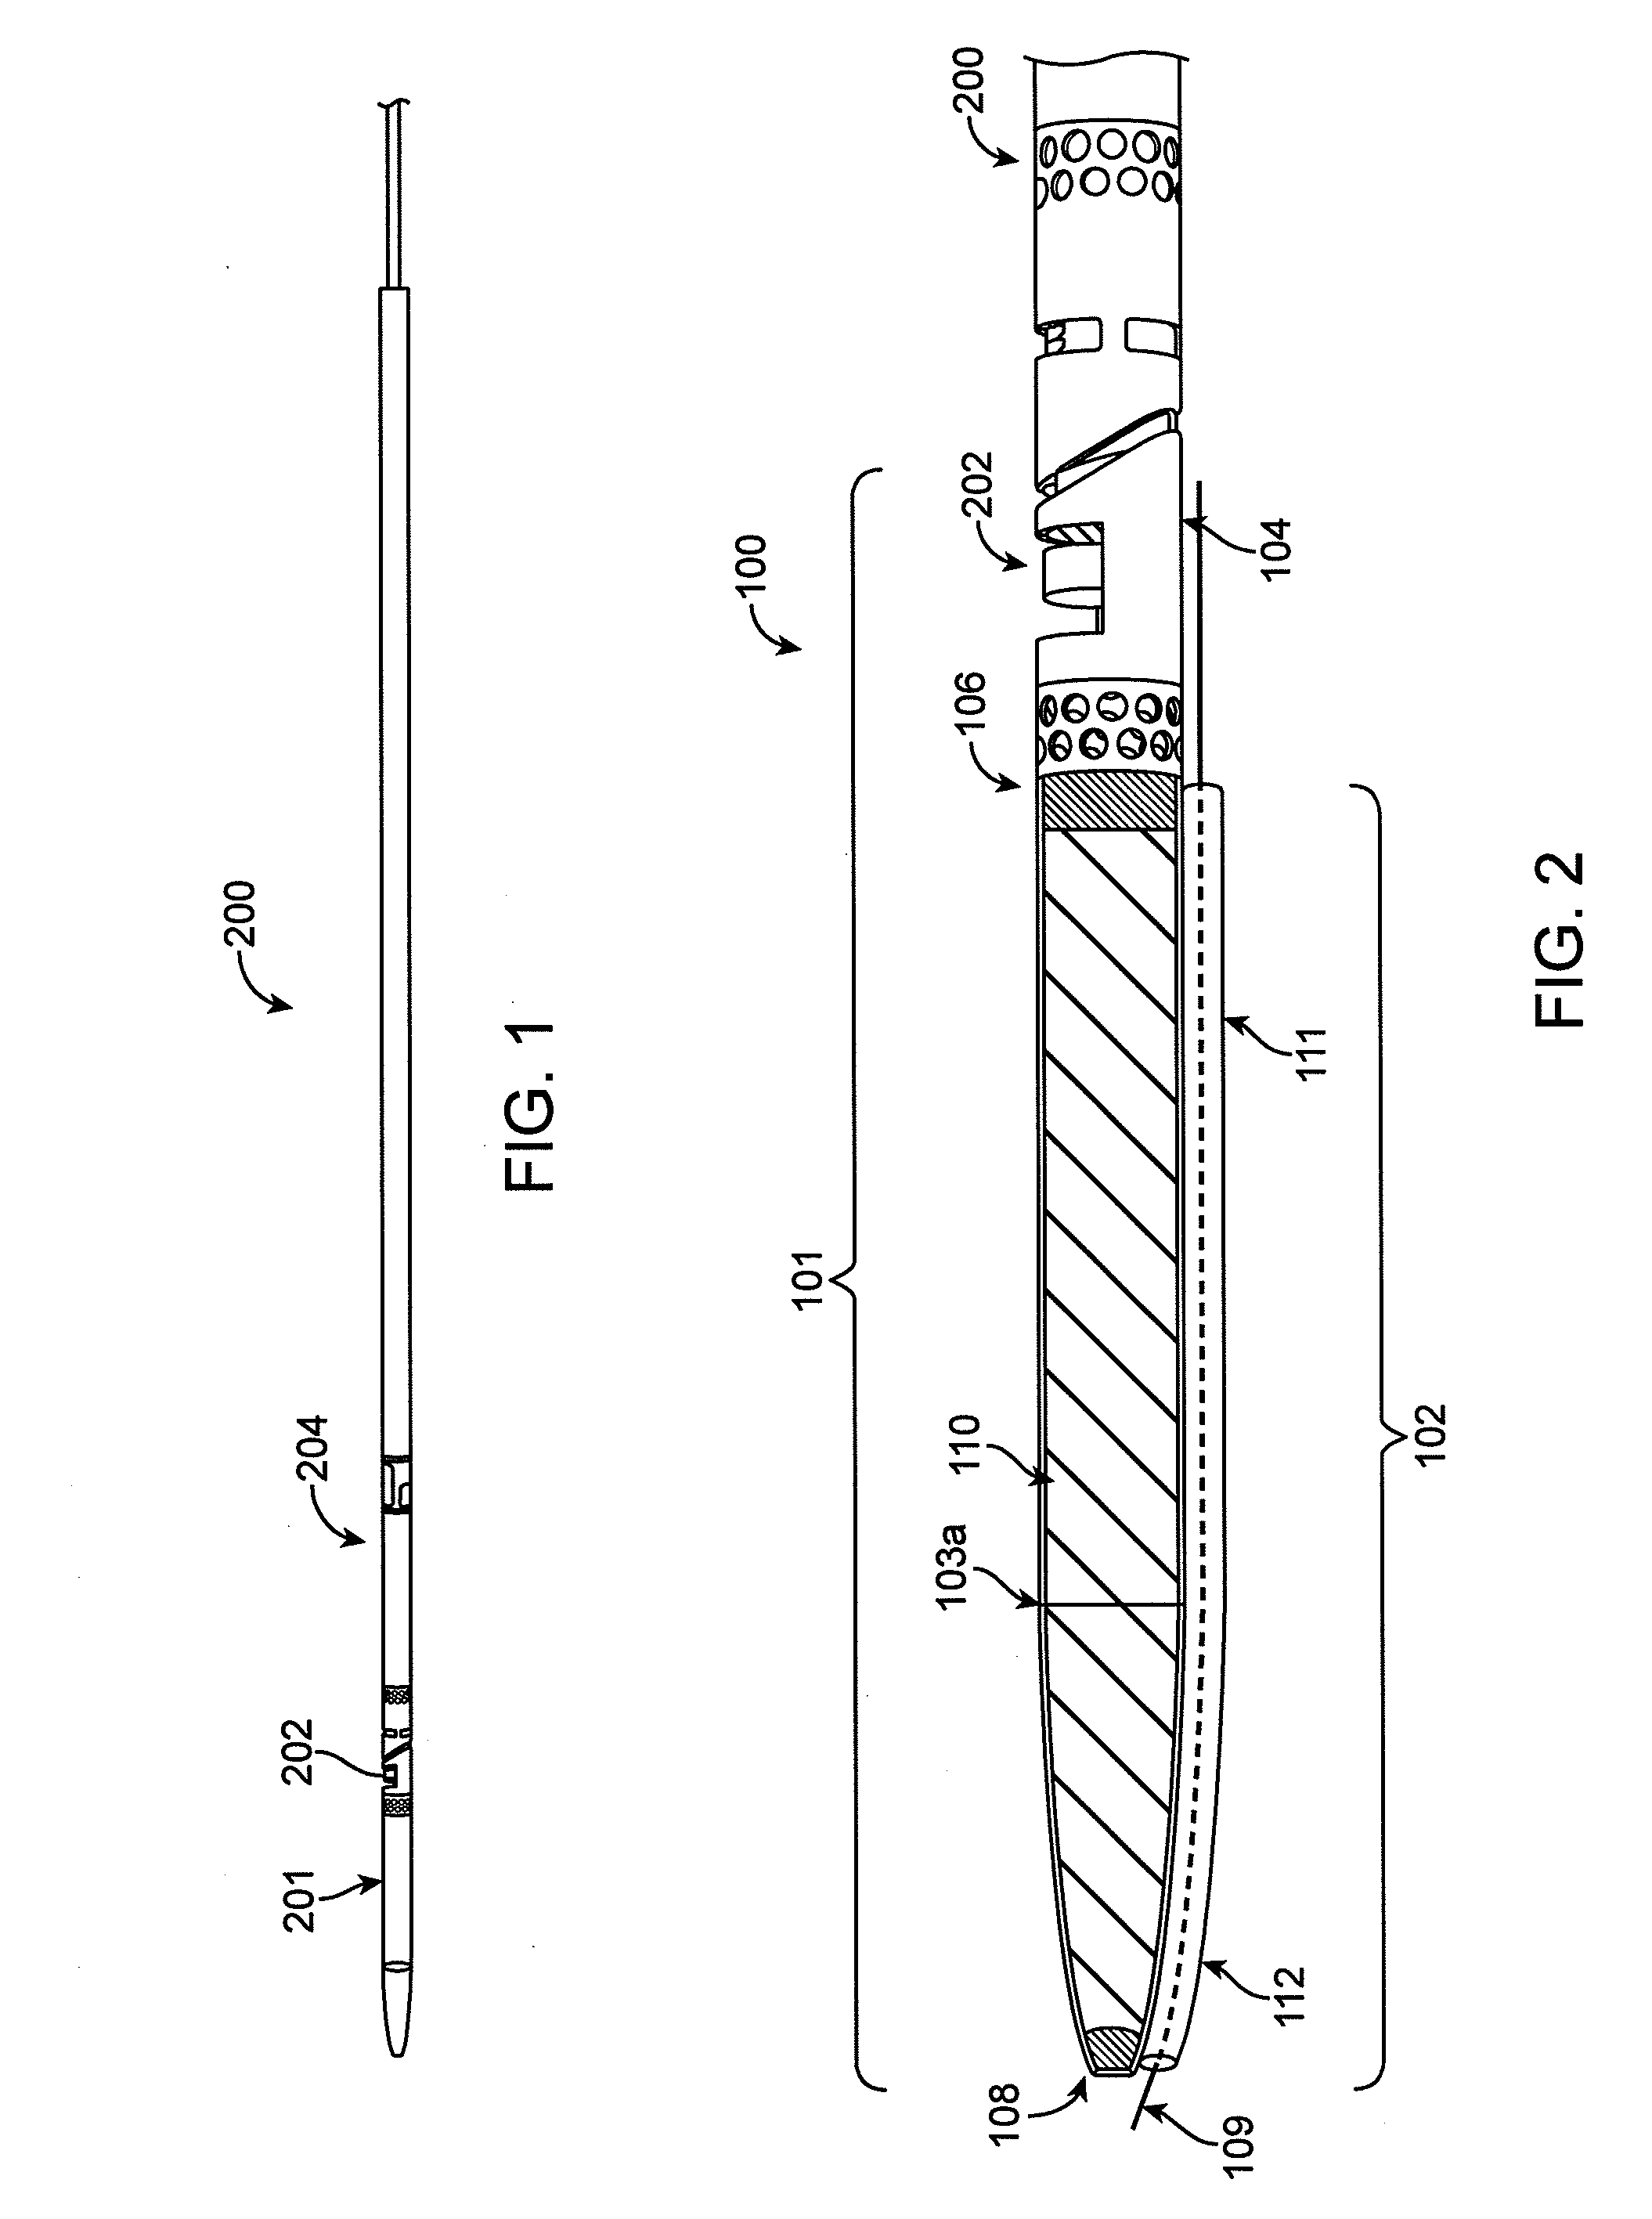 Tissue collection device for catheter